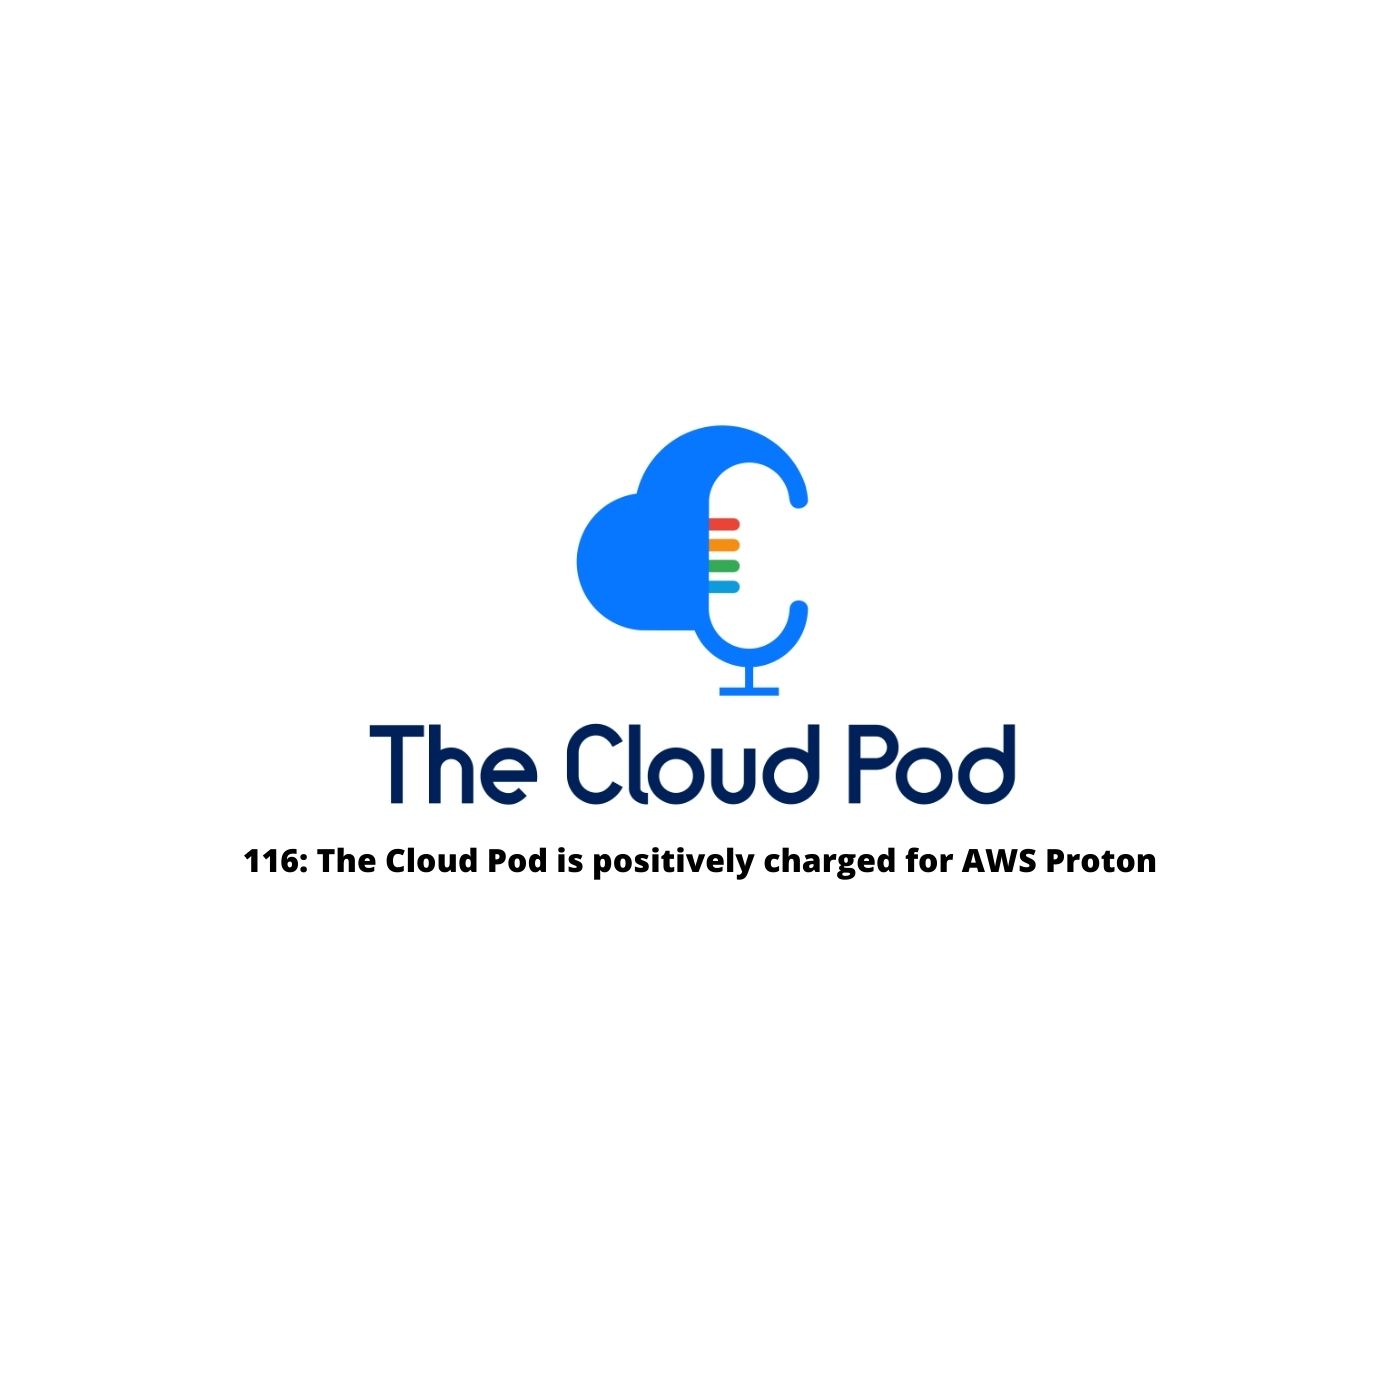 116: The Cloud Pod is positively charged for AWS Proton